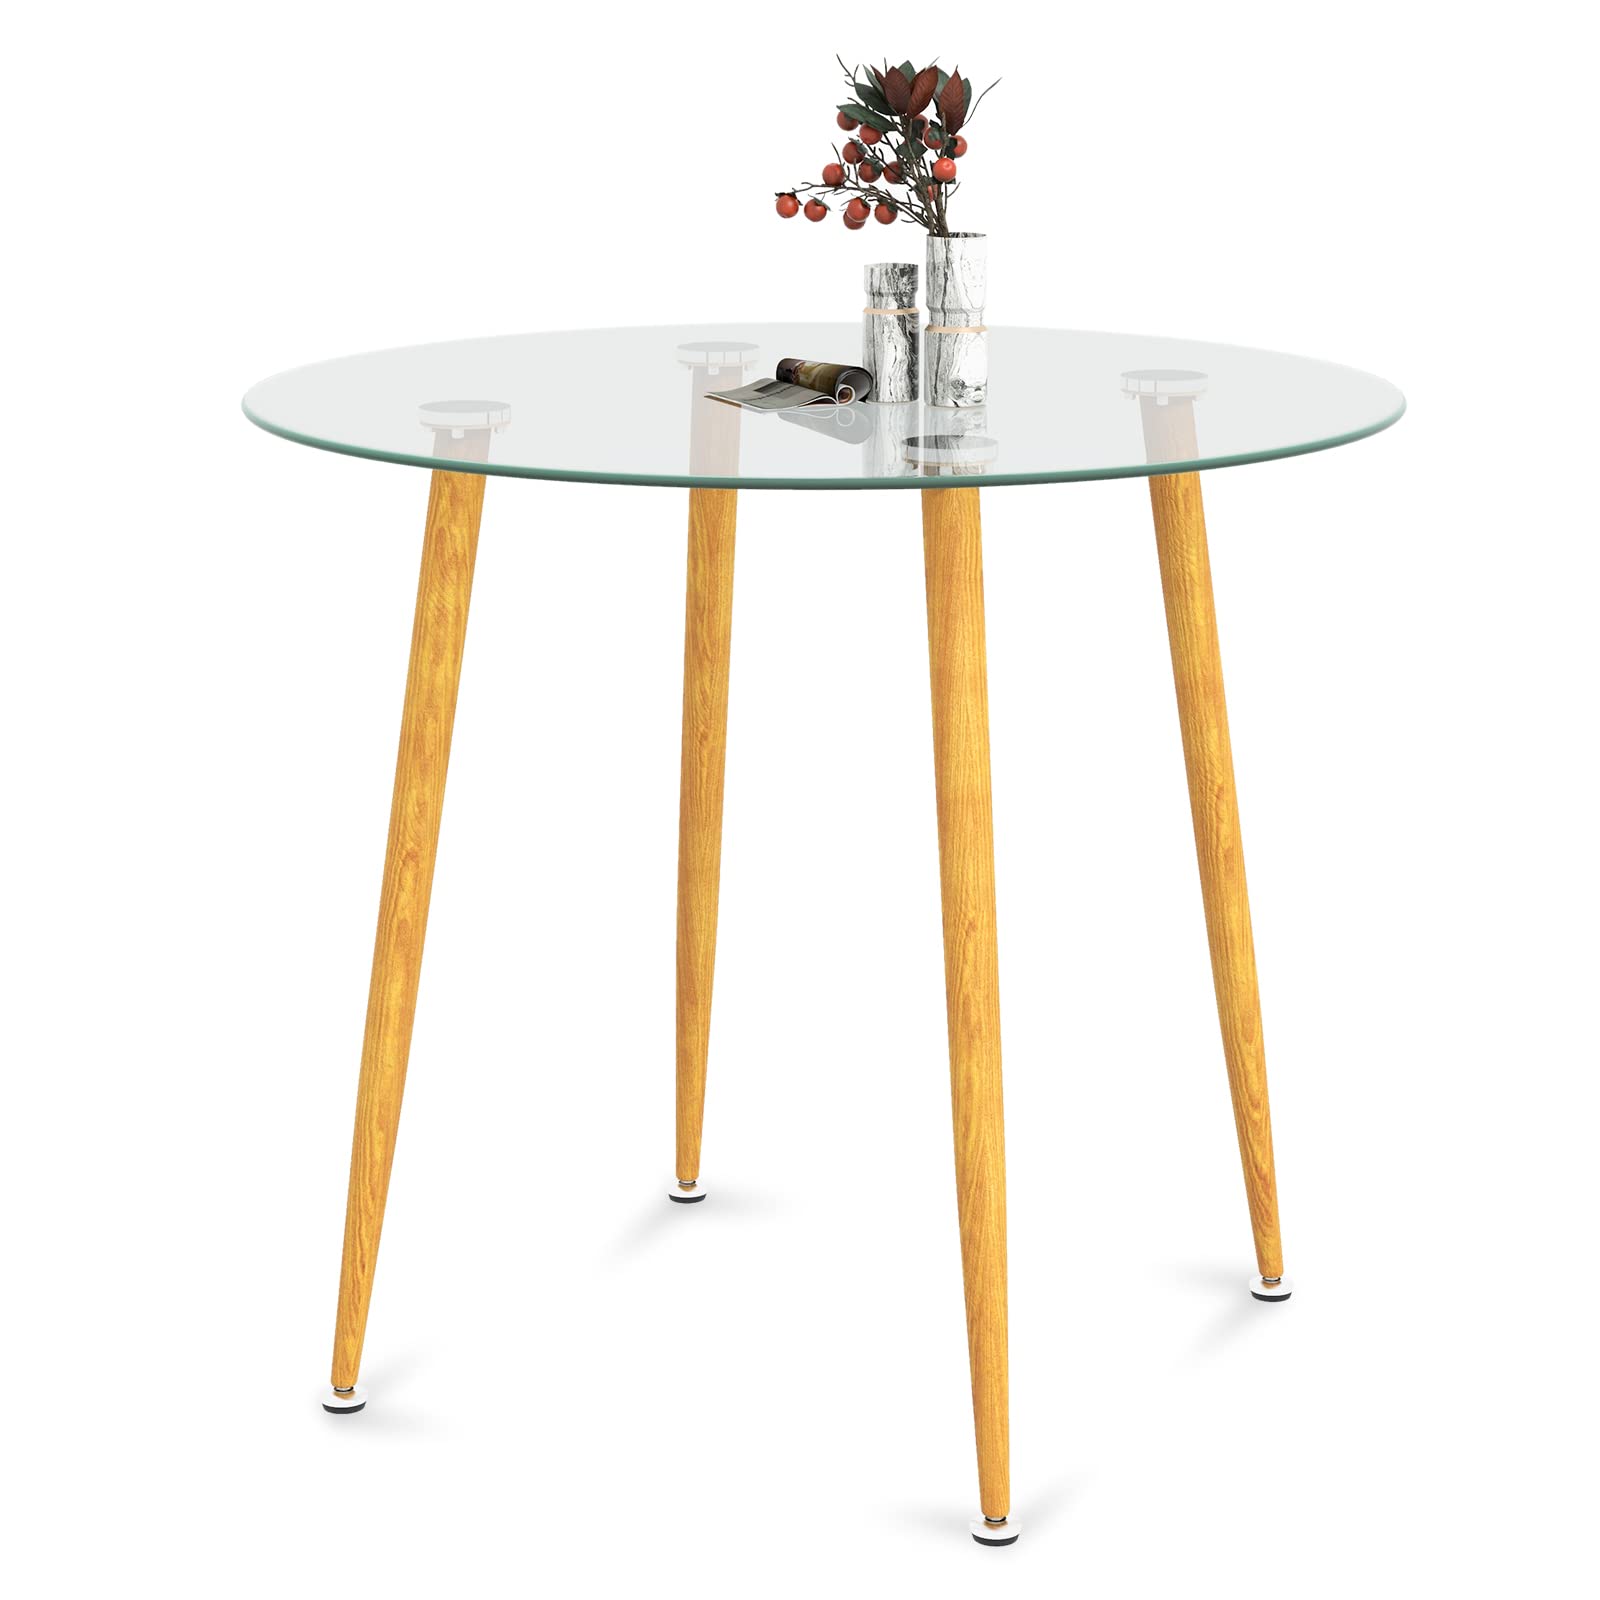 Giantex Round Glass Dining Table, Kitchen Dinner Table with Tempered Glass Tabletop & Metal Legs